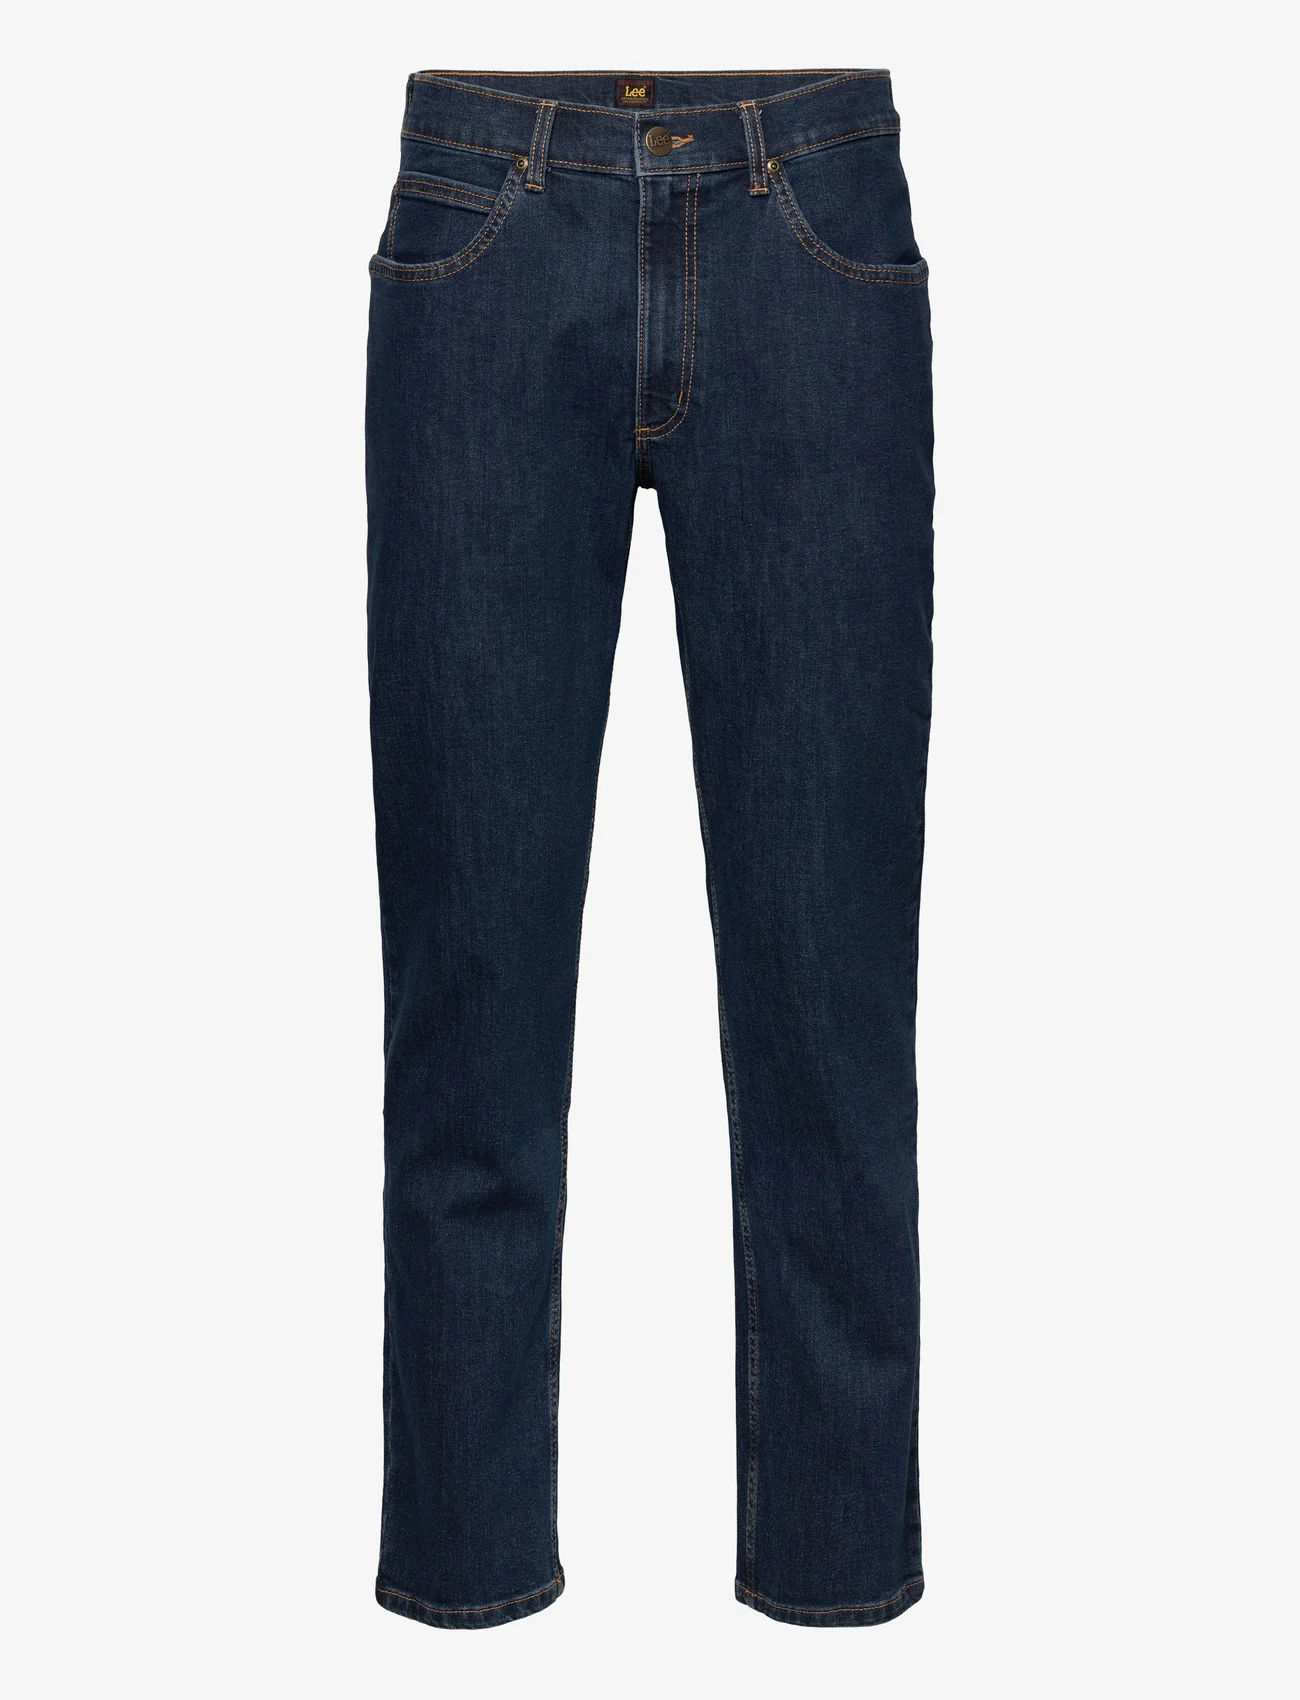 Lee Jeans Brooklyn (Dark Stonewash), ( €) | Large selection of outlet-styles  